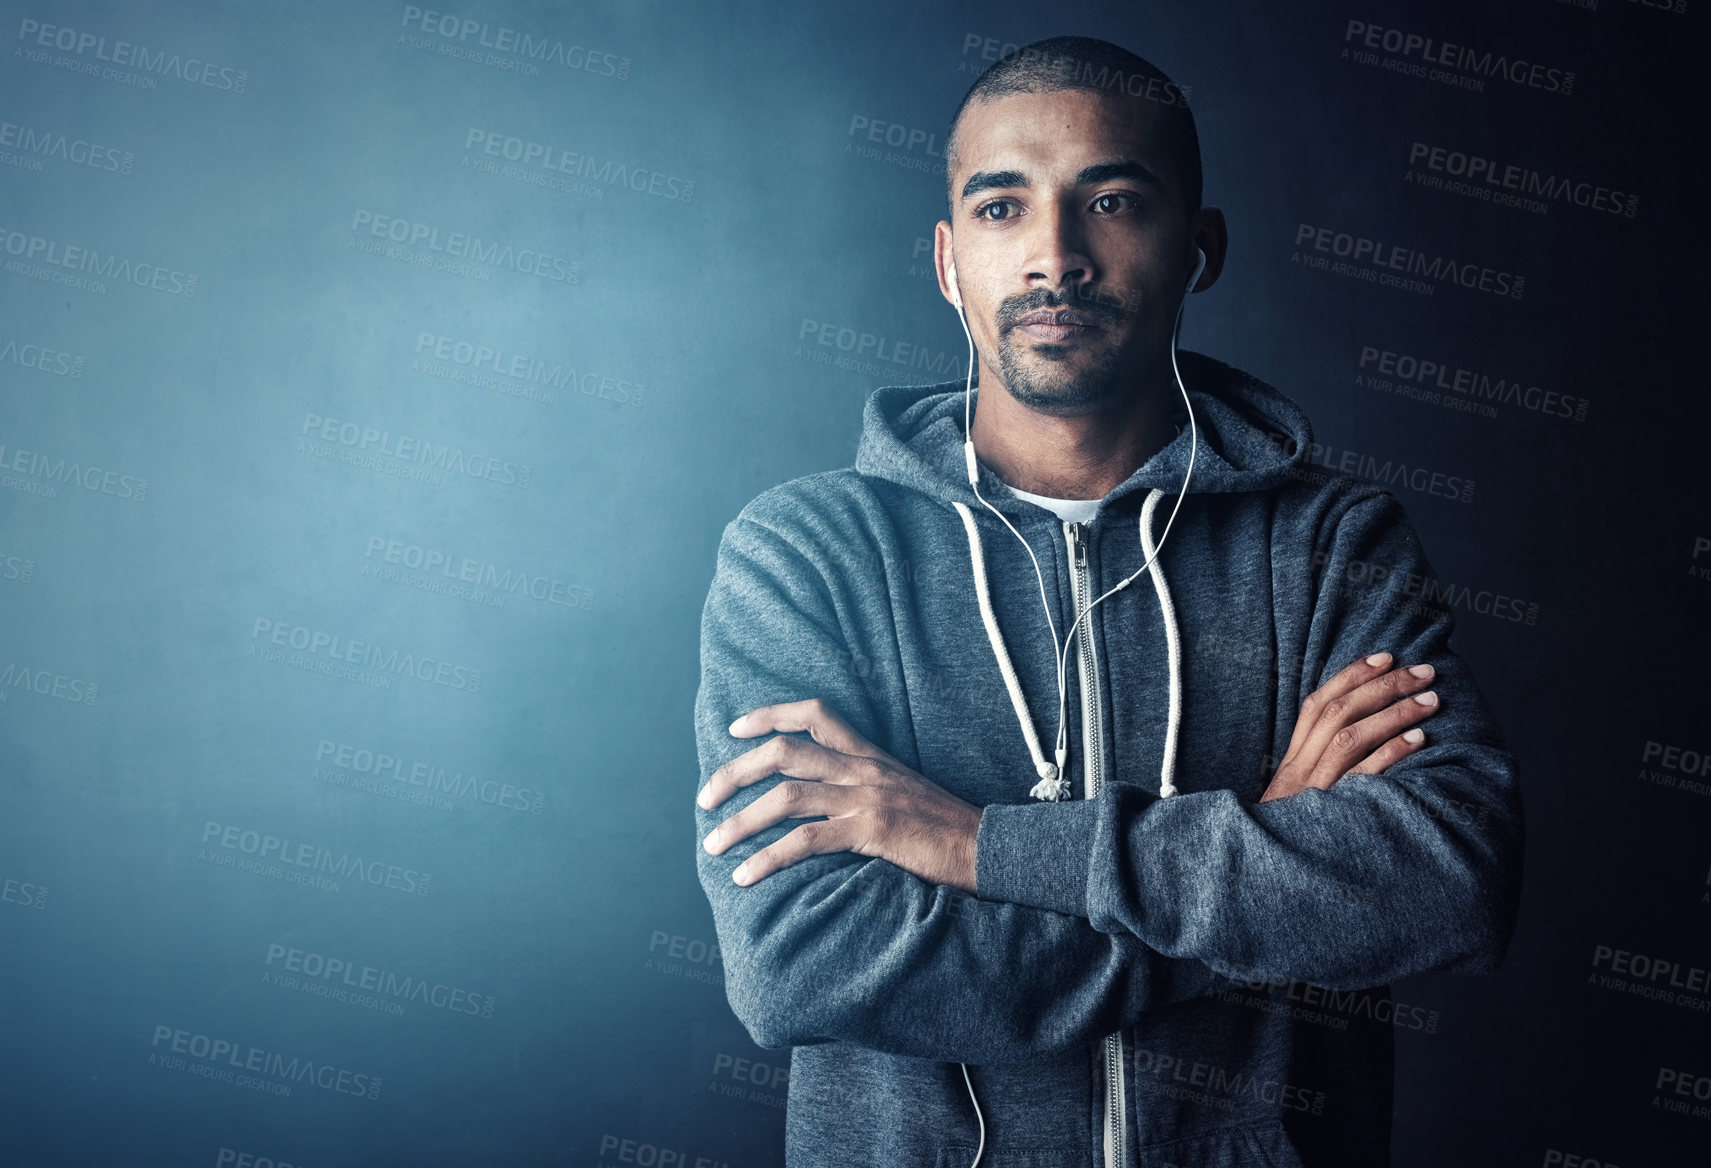 Buy stock photo Studio shot of a young man standing with his arms folded against a dark background